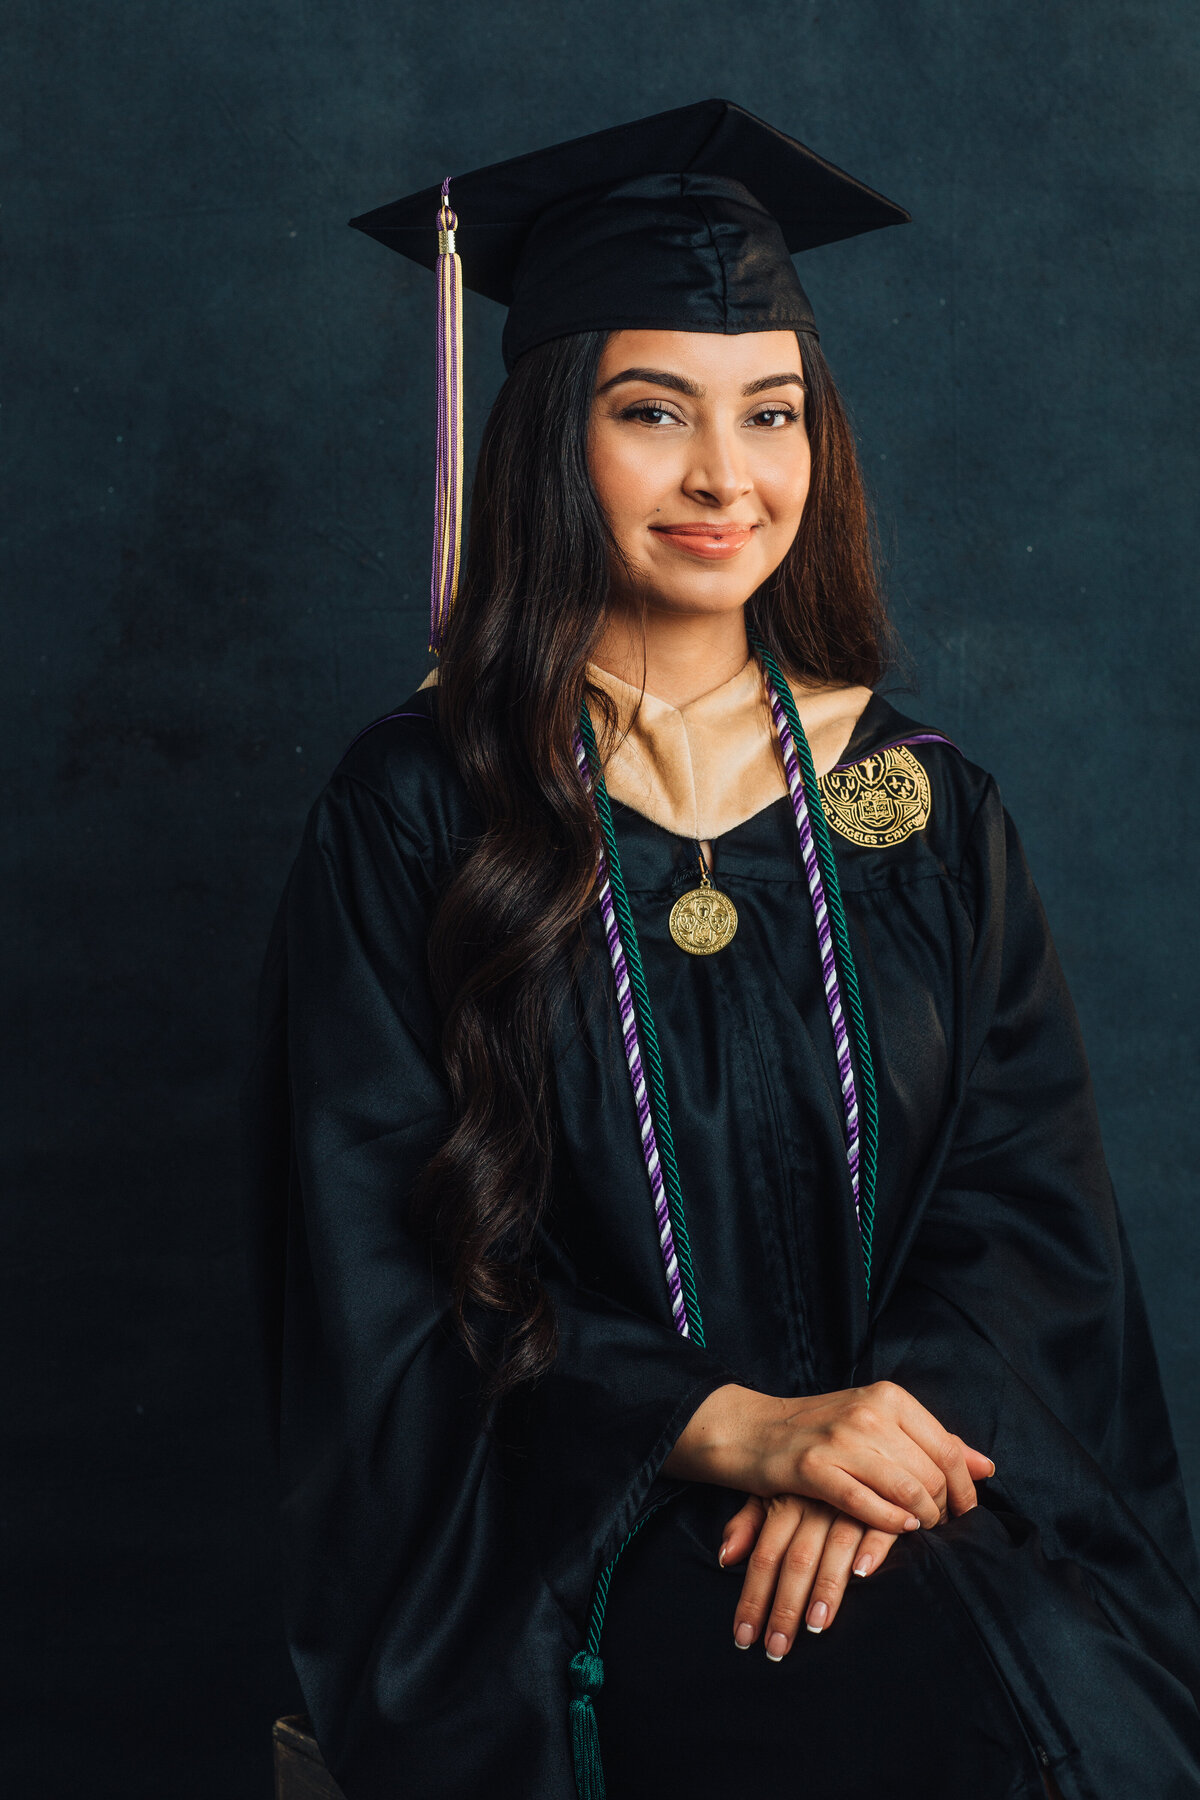 Graduation Portrait Of Young Woman Sitting On a Stool Holding Her Hands Los Angeles